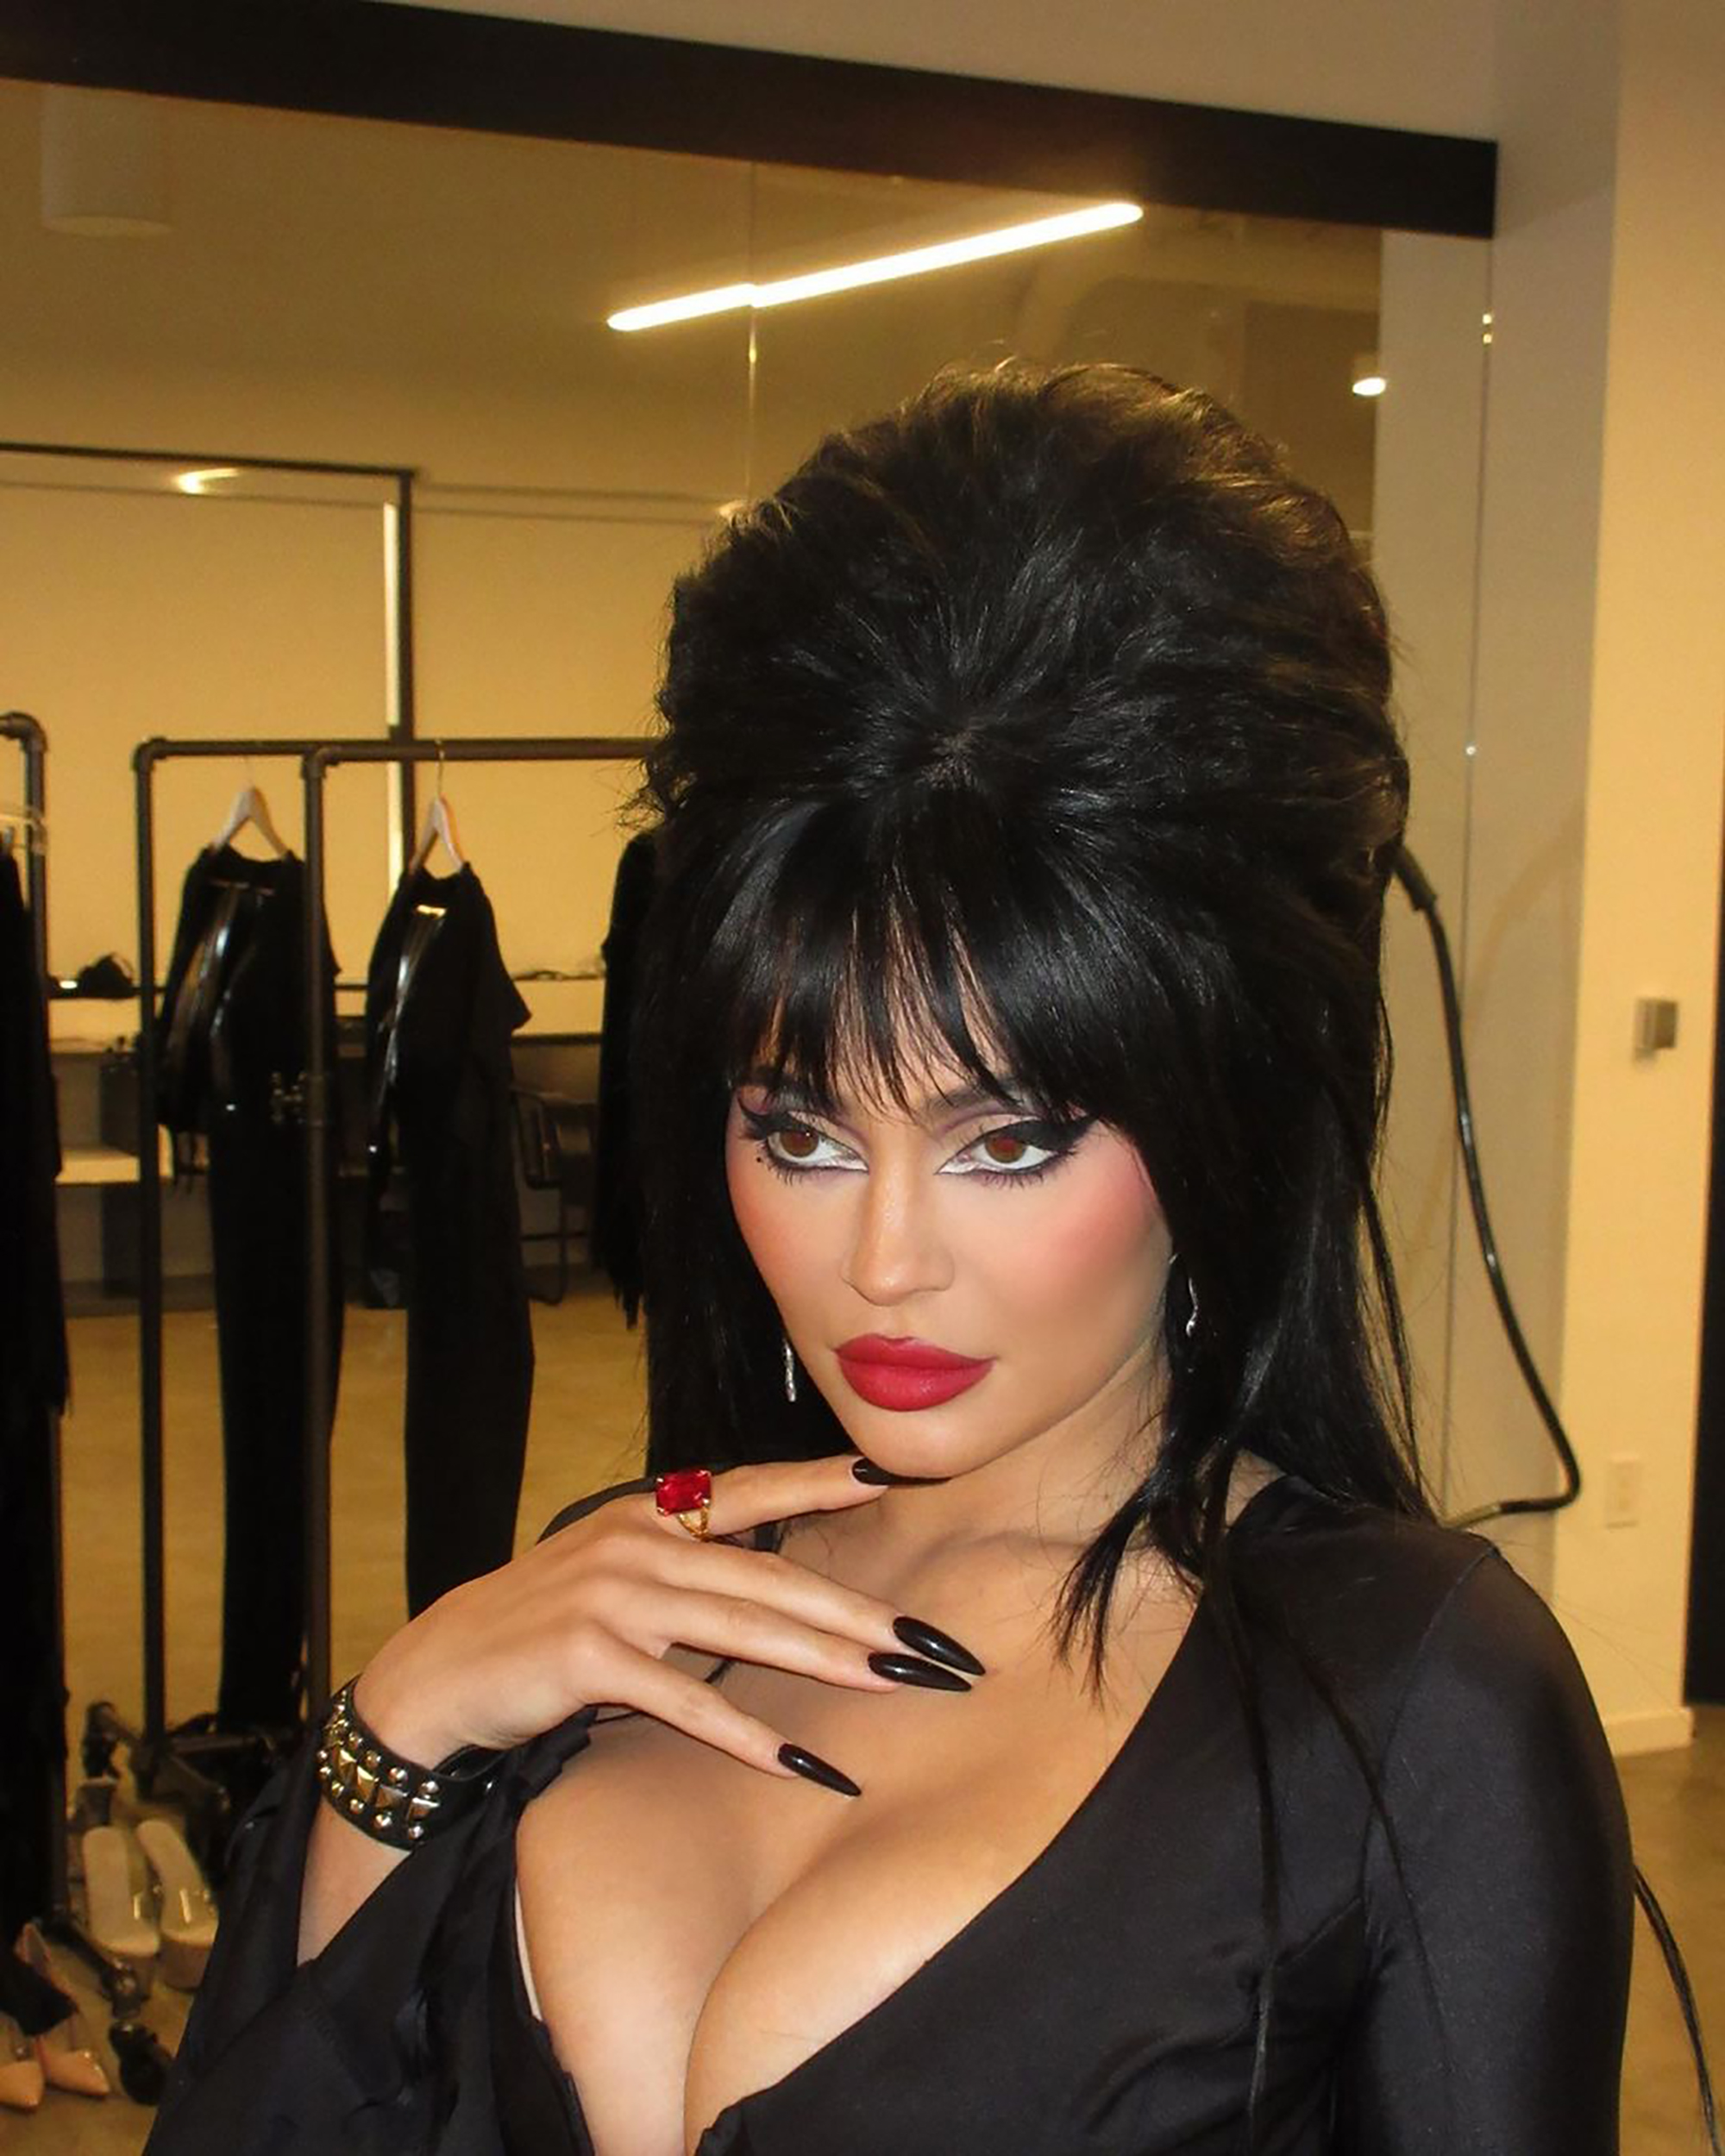 Jenner rocked a plunging black dress much like Elvira's iconic costume